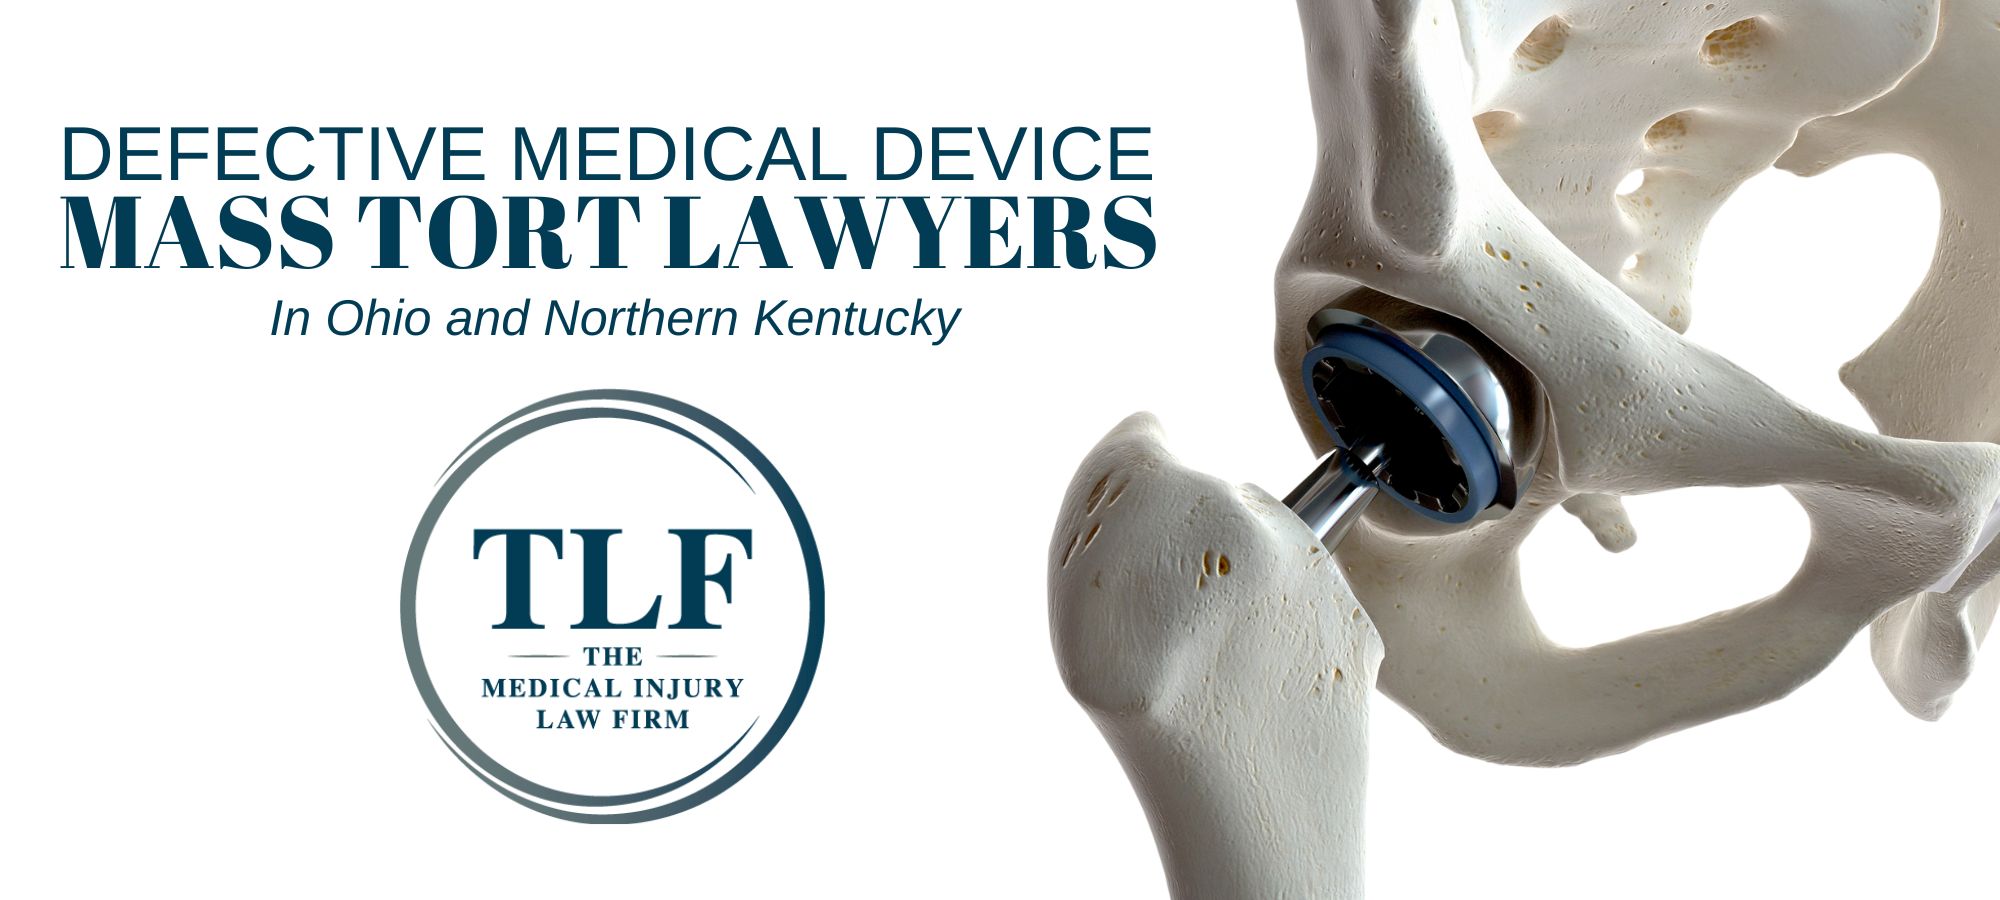 Defective Medical Device Mass Tort Lawyer